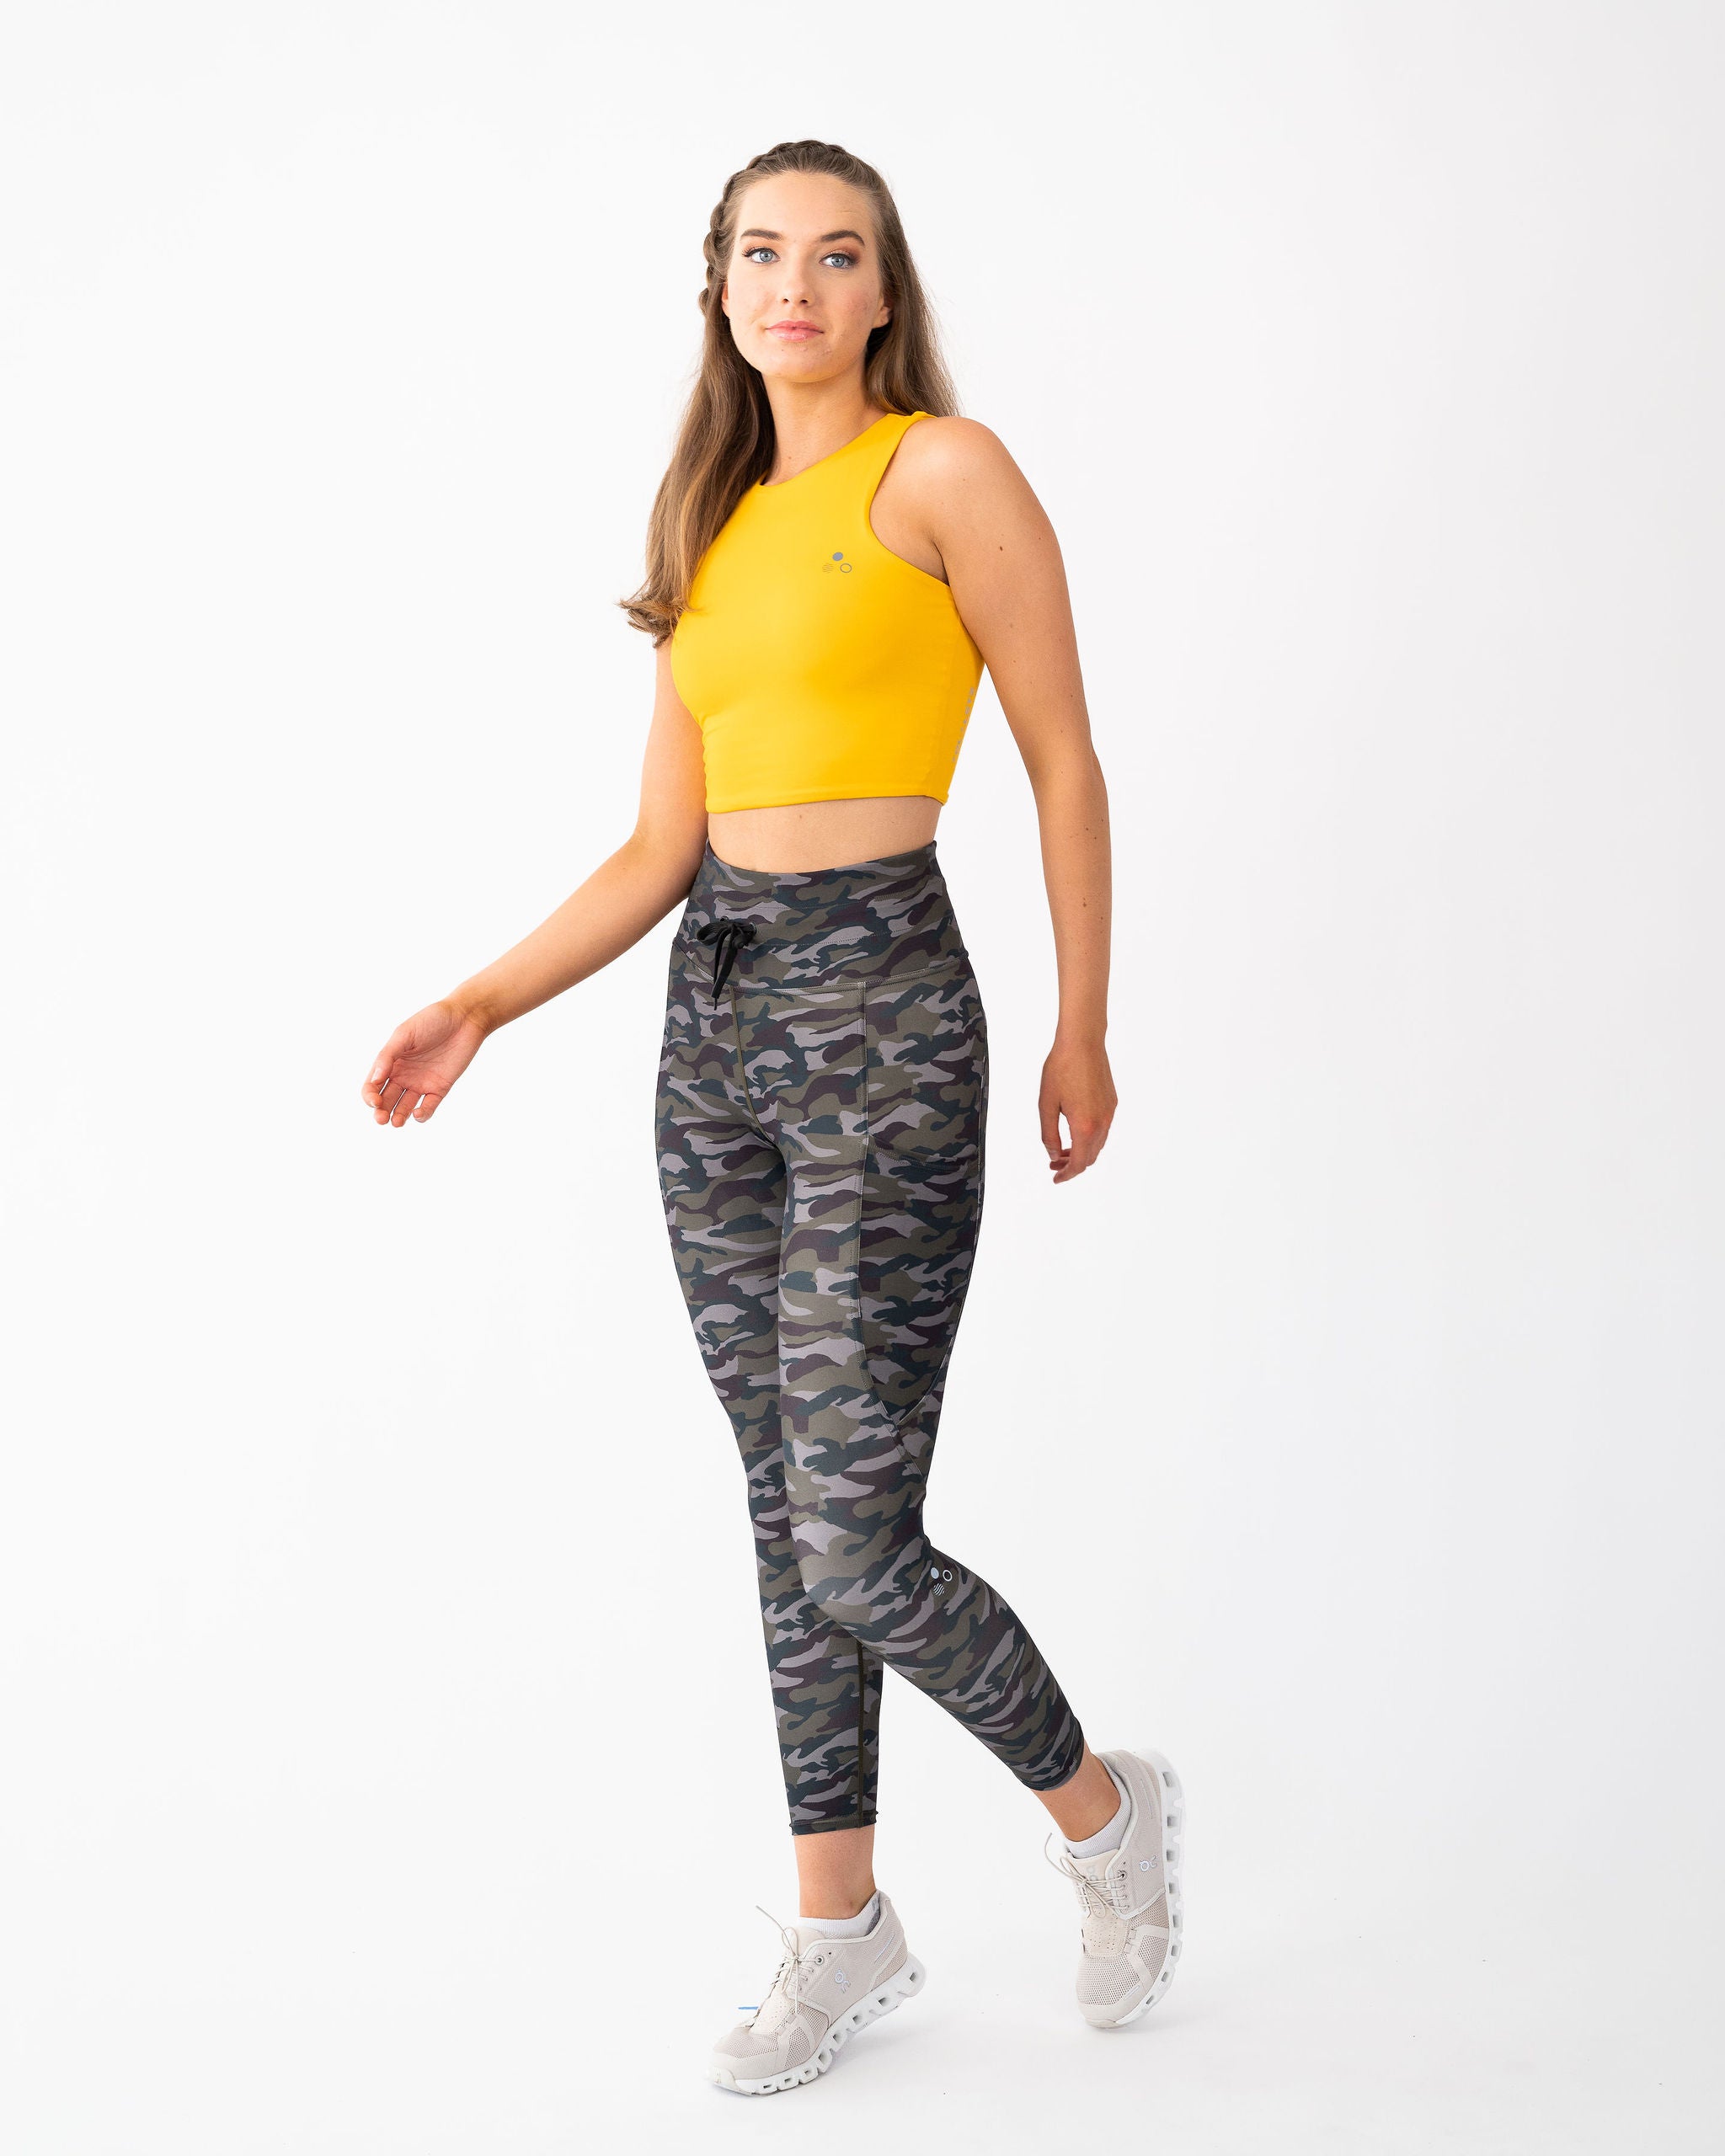 L) EVCR Colorful Camo Leggings Womens – Revived Clothing Exchange